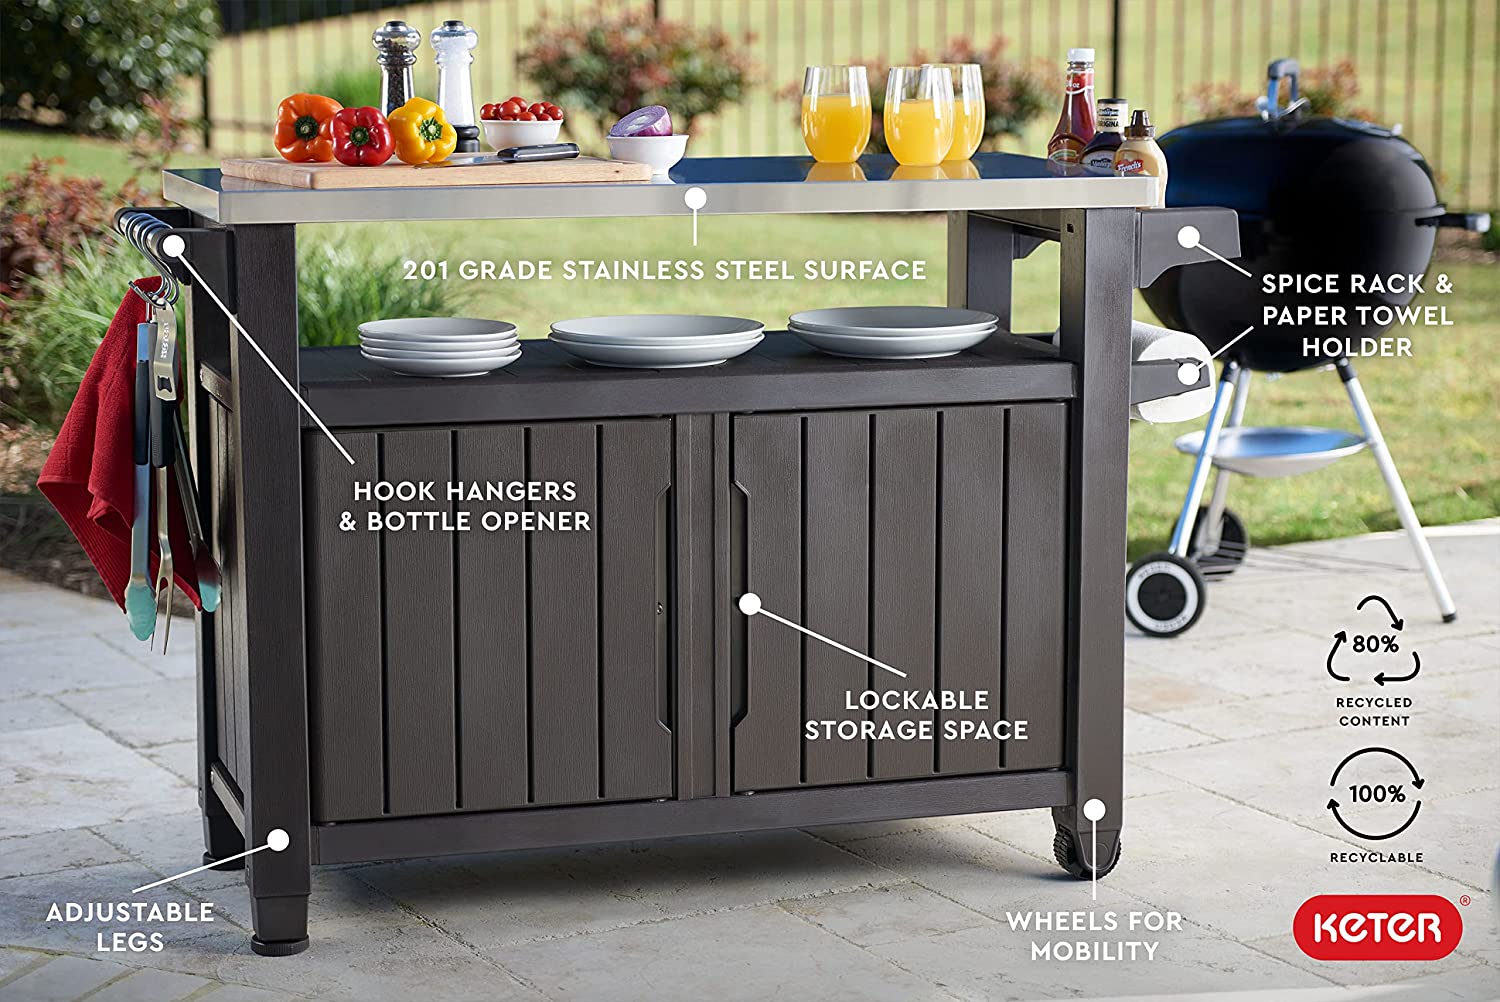 https://bigbigmart.com/wp-content/uploads/2022/07/Keter-Unity-XL-Portable-Outdoor-Table-and-Storage-Cabinet-with-Hooks-for-Grill-Accessories-Stainless-Steel-Top-for-Patio-Kitchen-Island-or-Bar-Cart-Espresso-Brown7.jpg